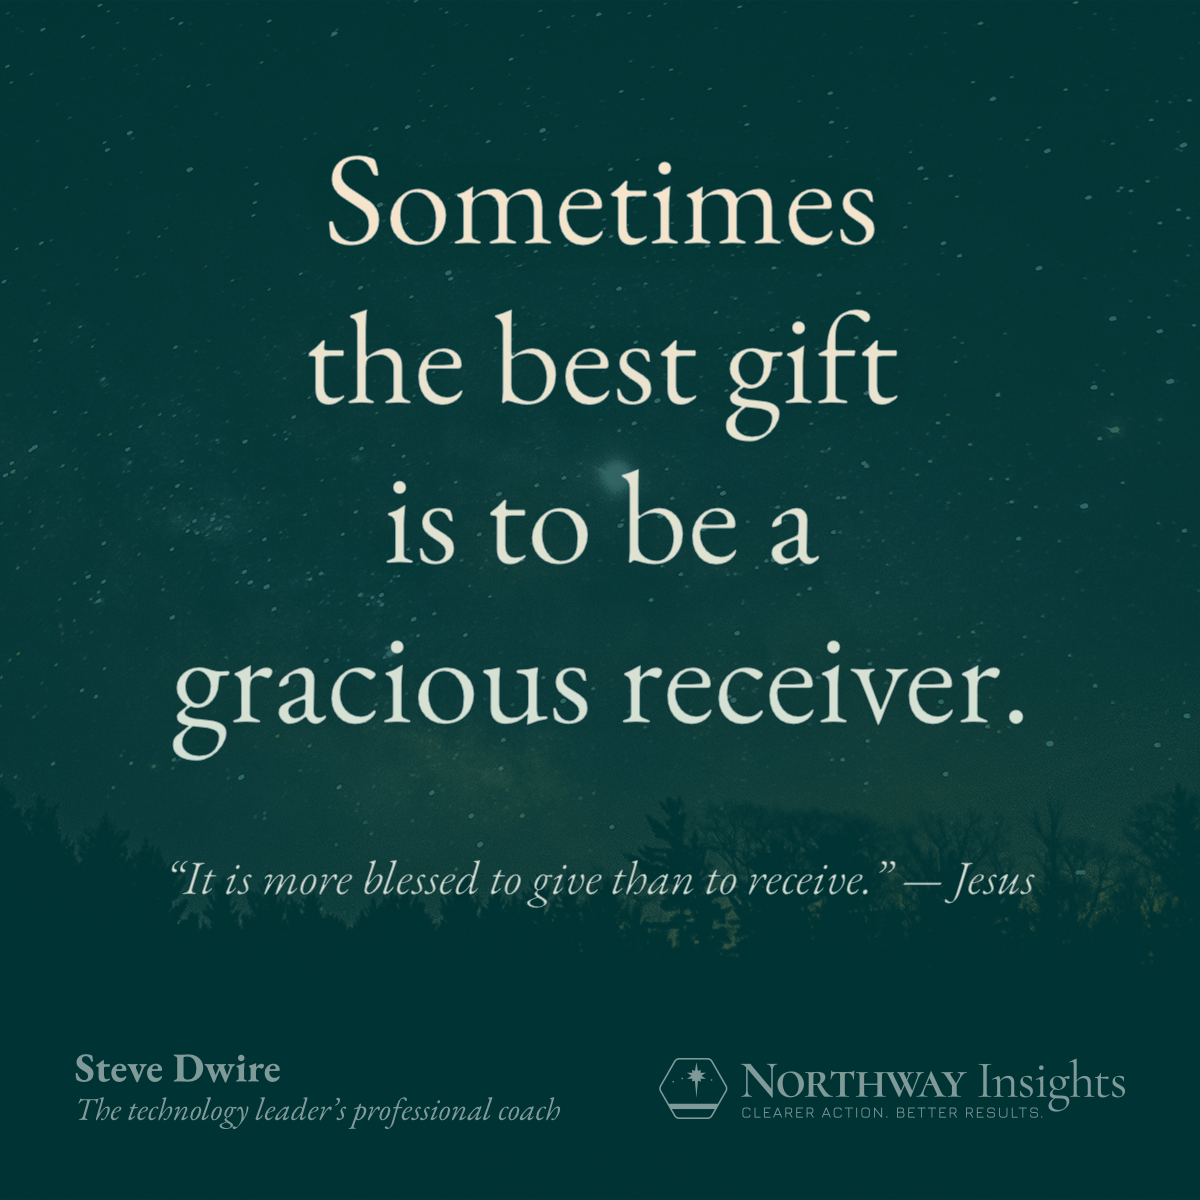 Sometimes the best gift is to be a gracious receiver